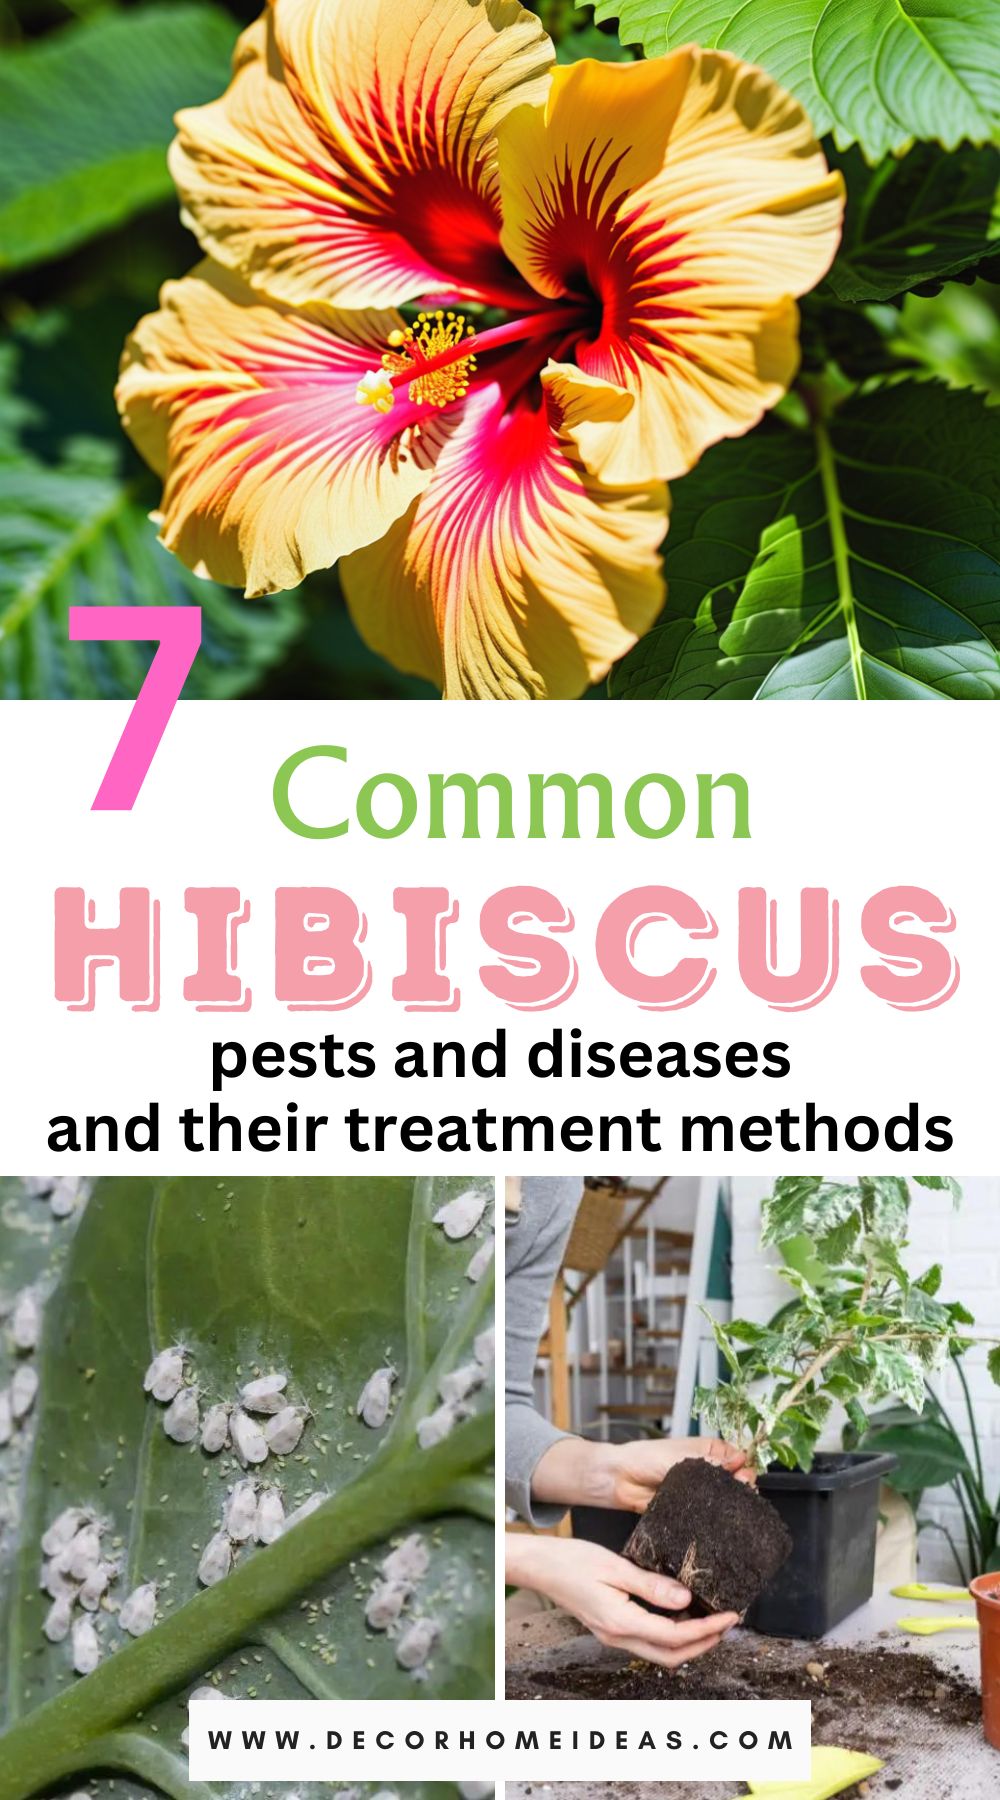 Identify and combat the top 7 common pests and diseases that afflict hibiscus plants. Explore effective treatment methods to keep your hibiscus vibrant and healthy in this comprehensive guide.